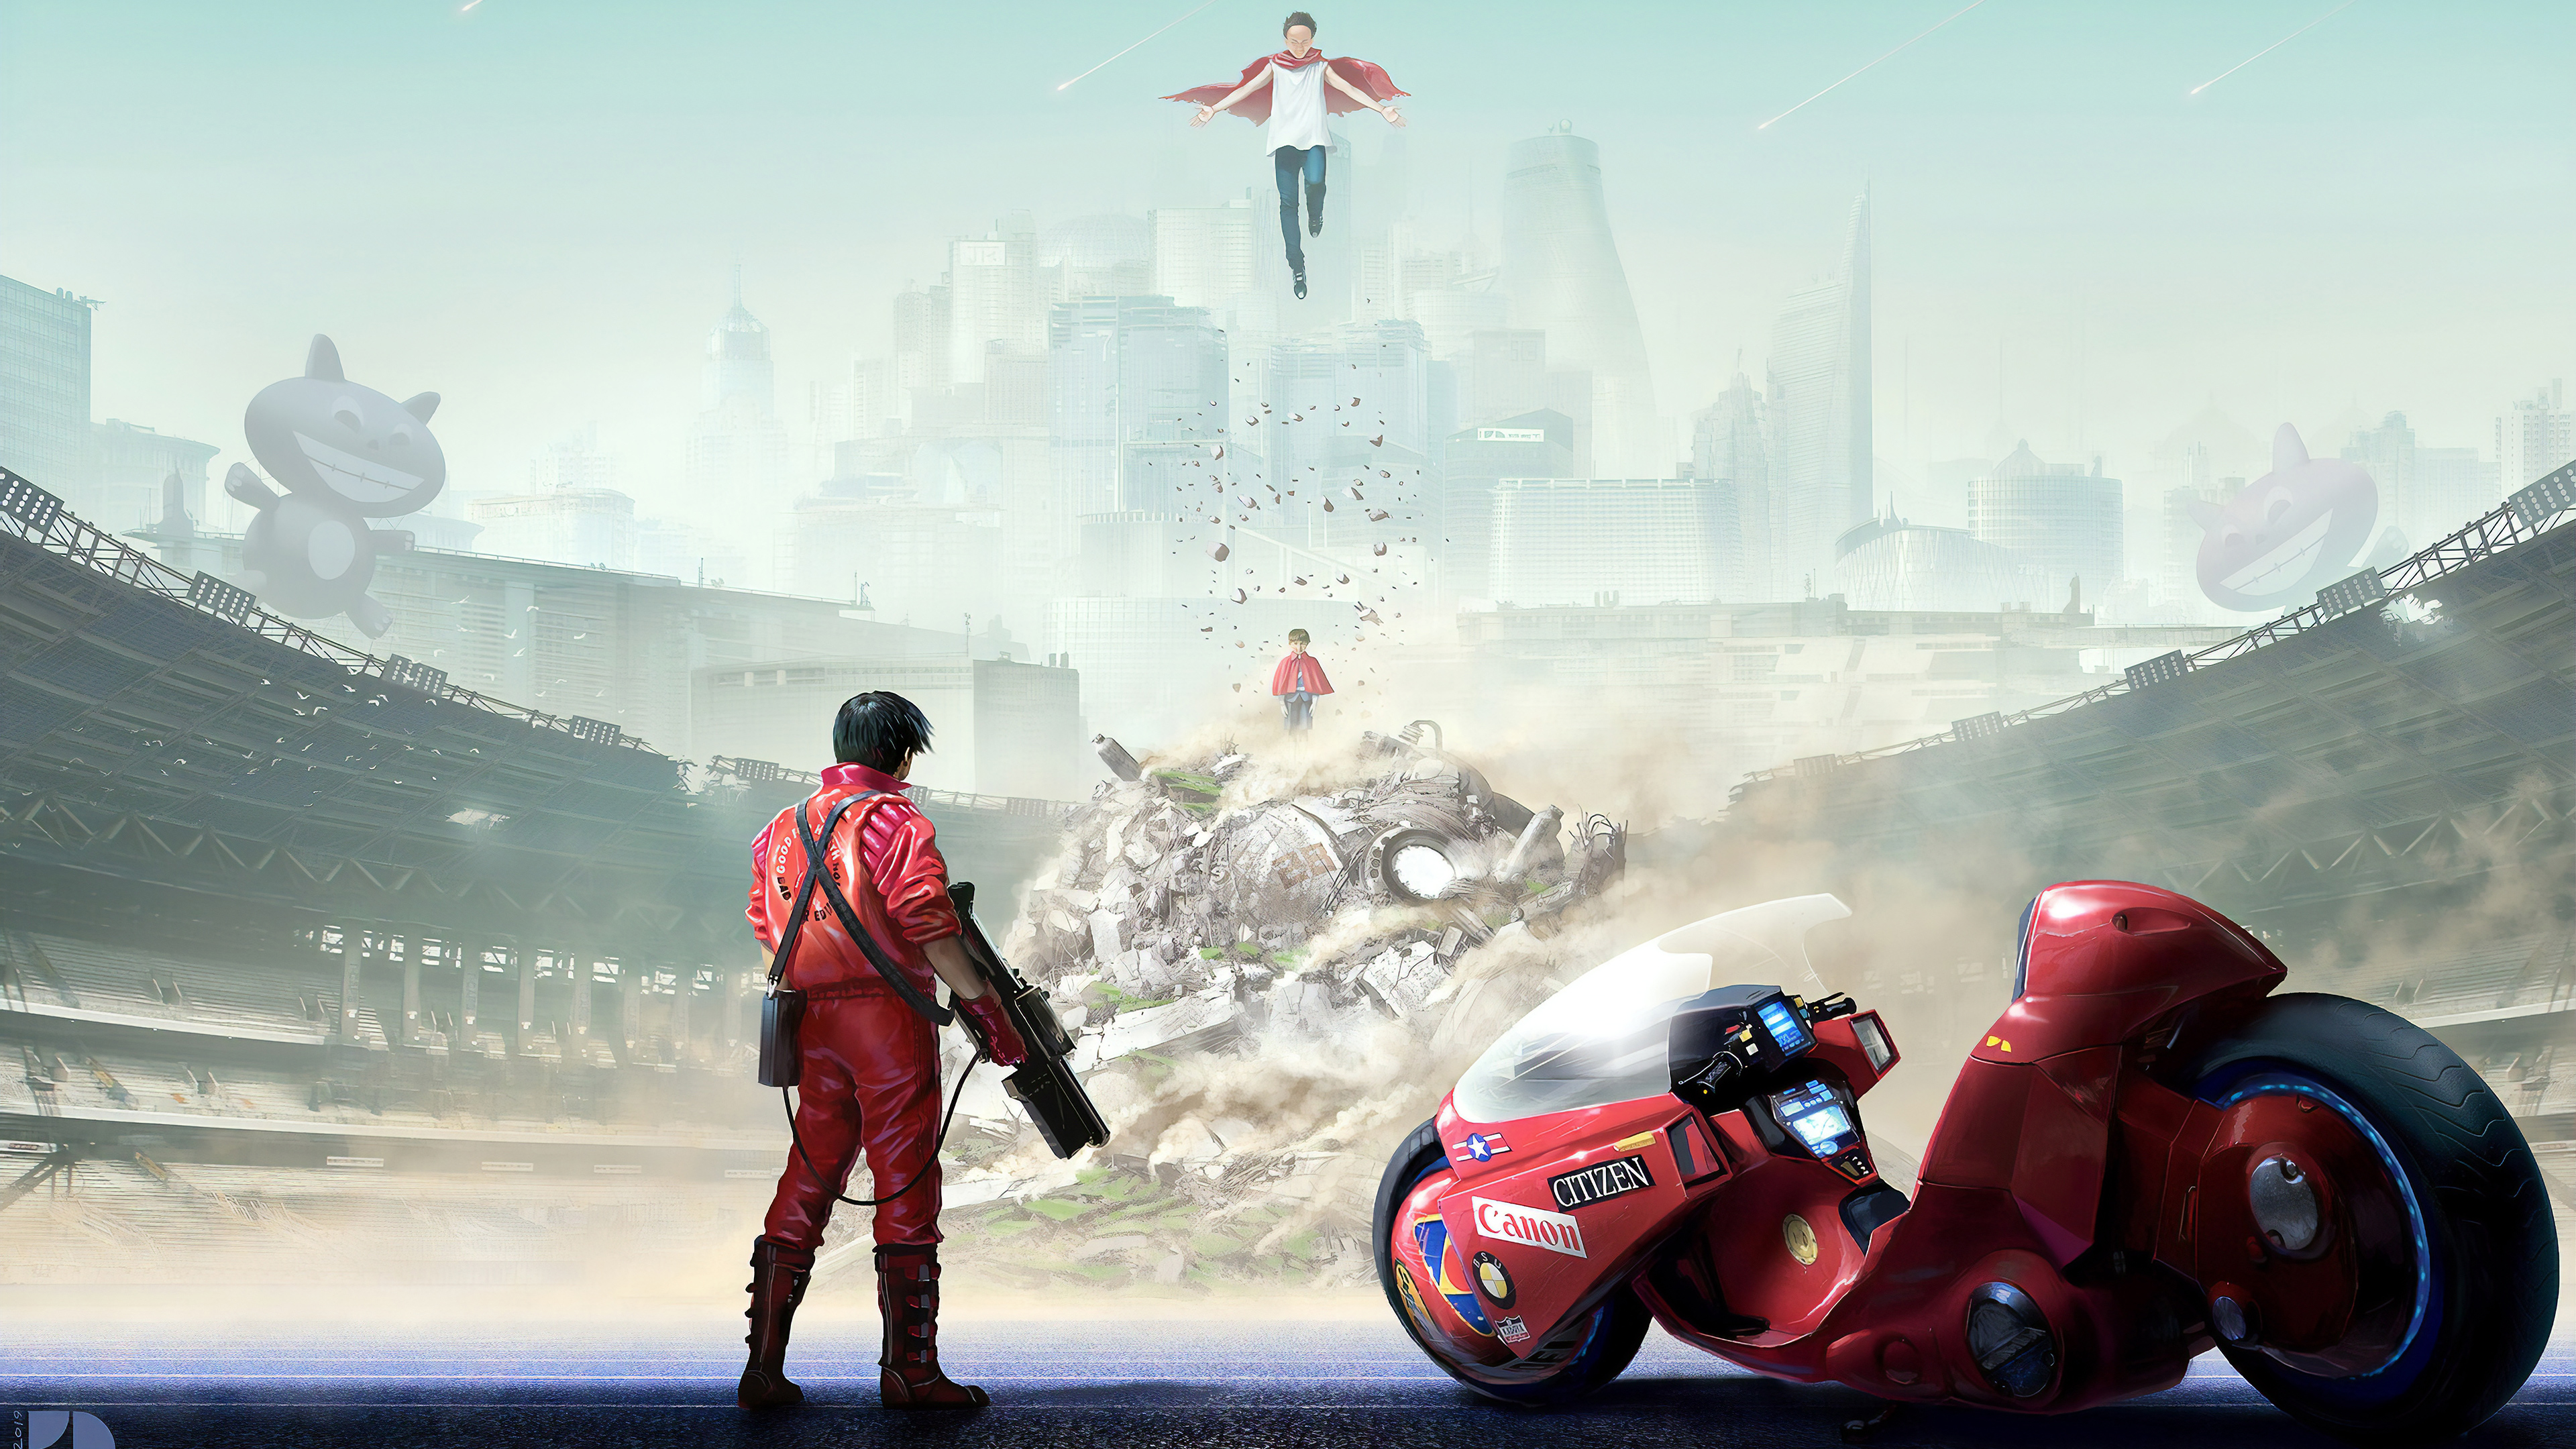 48x48 Akira Anime Ipad Air Wallpaper Hd Anime 4k Wallpapers Images Photos And Background Wallpapers Den